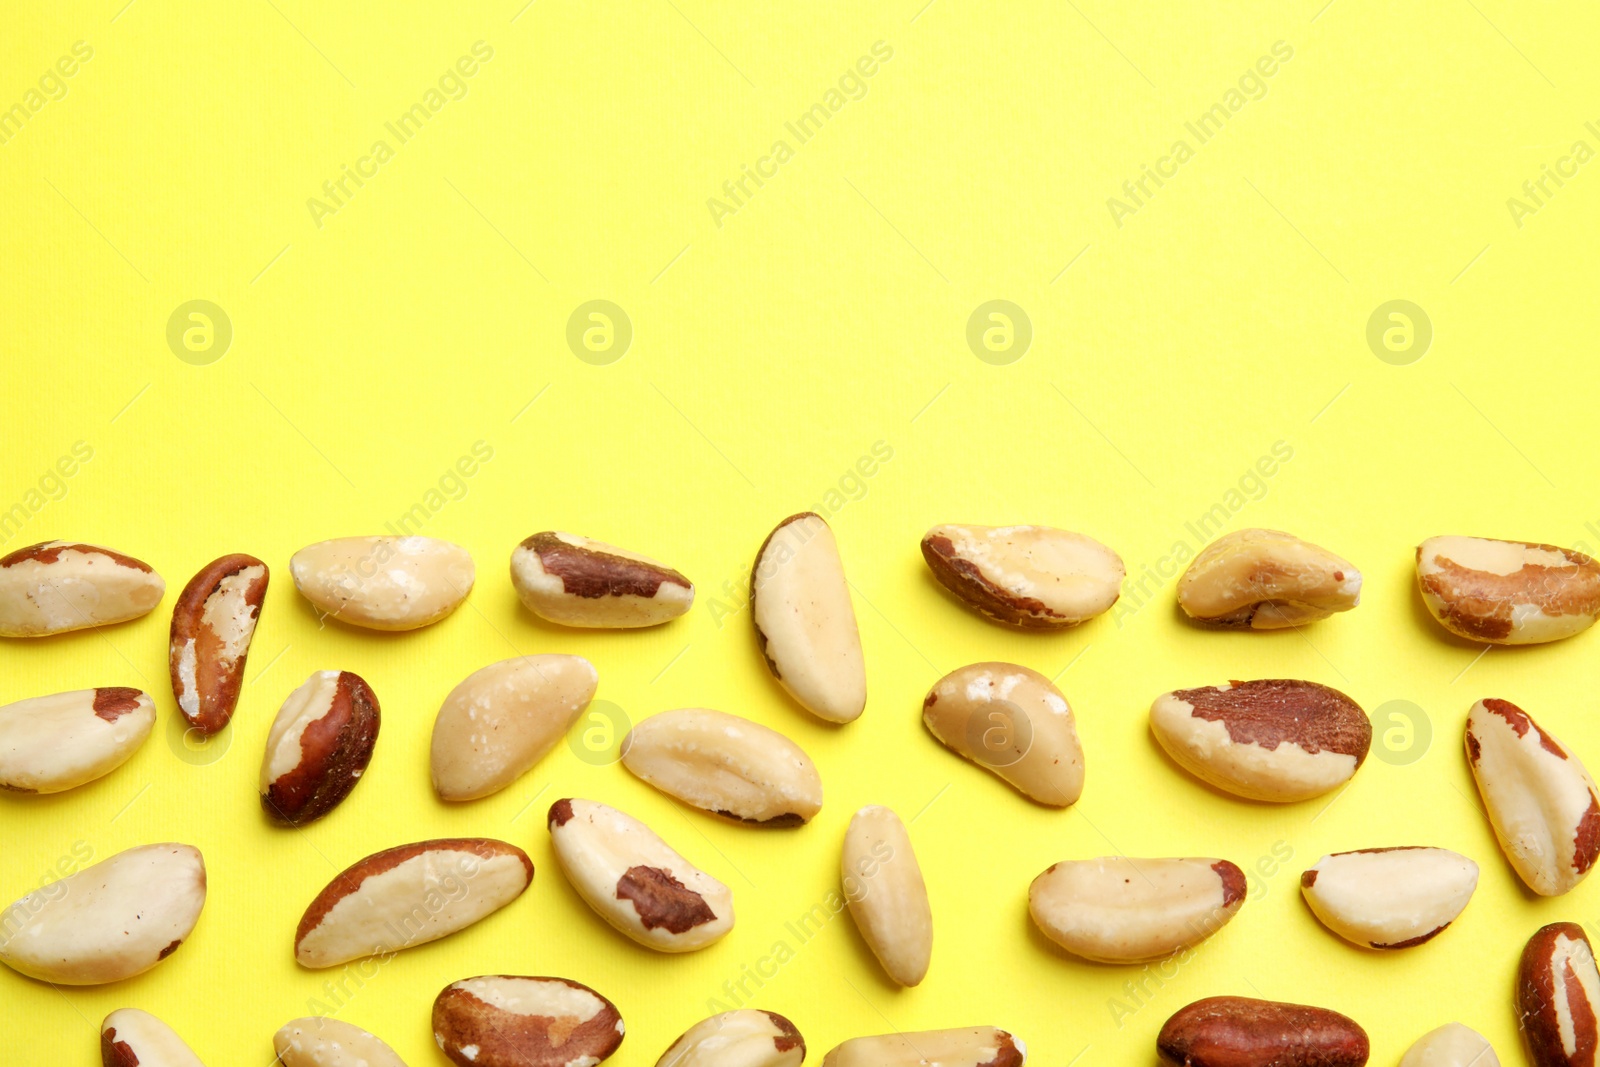 Photo of Flat lay composition with Brazil nuts and space for text on color background